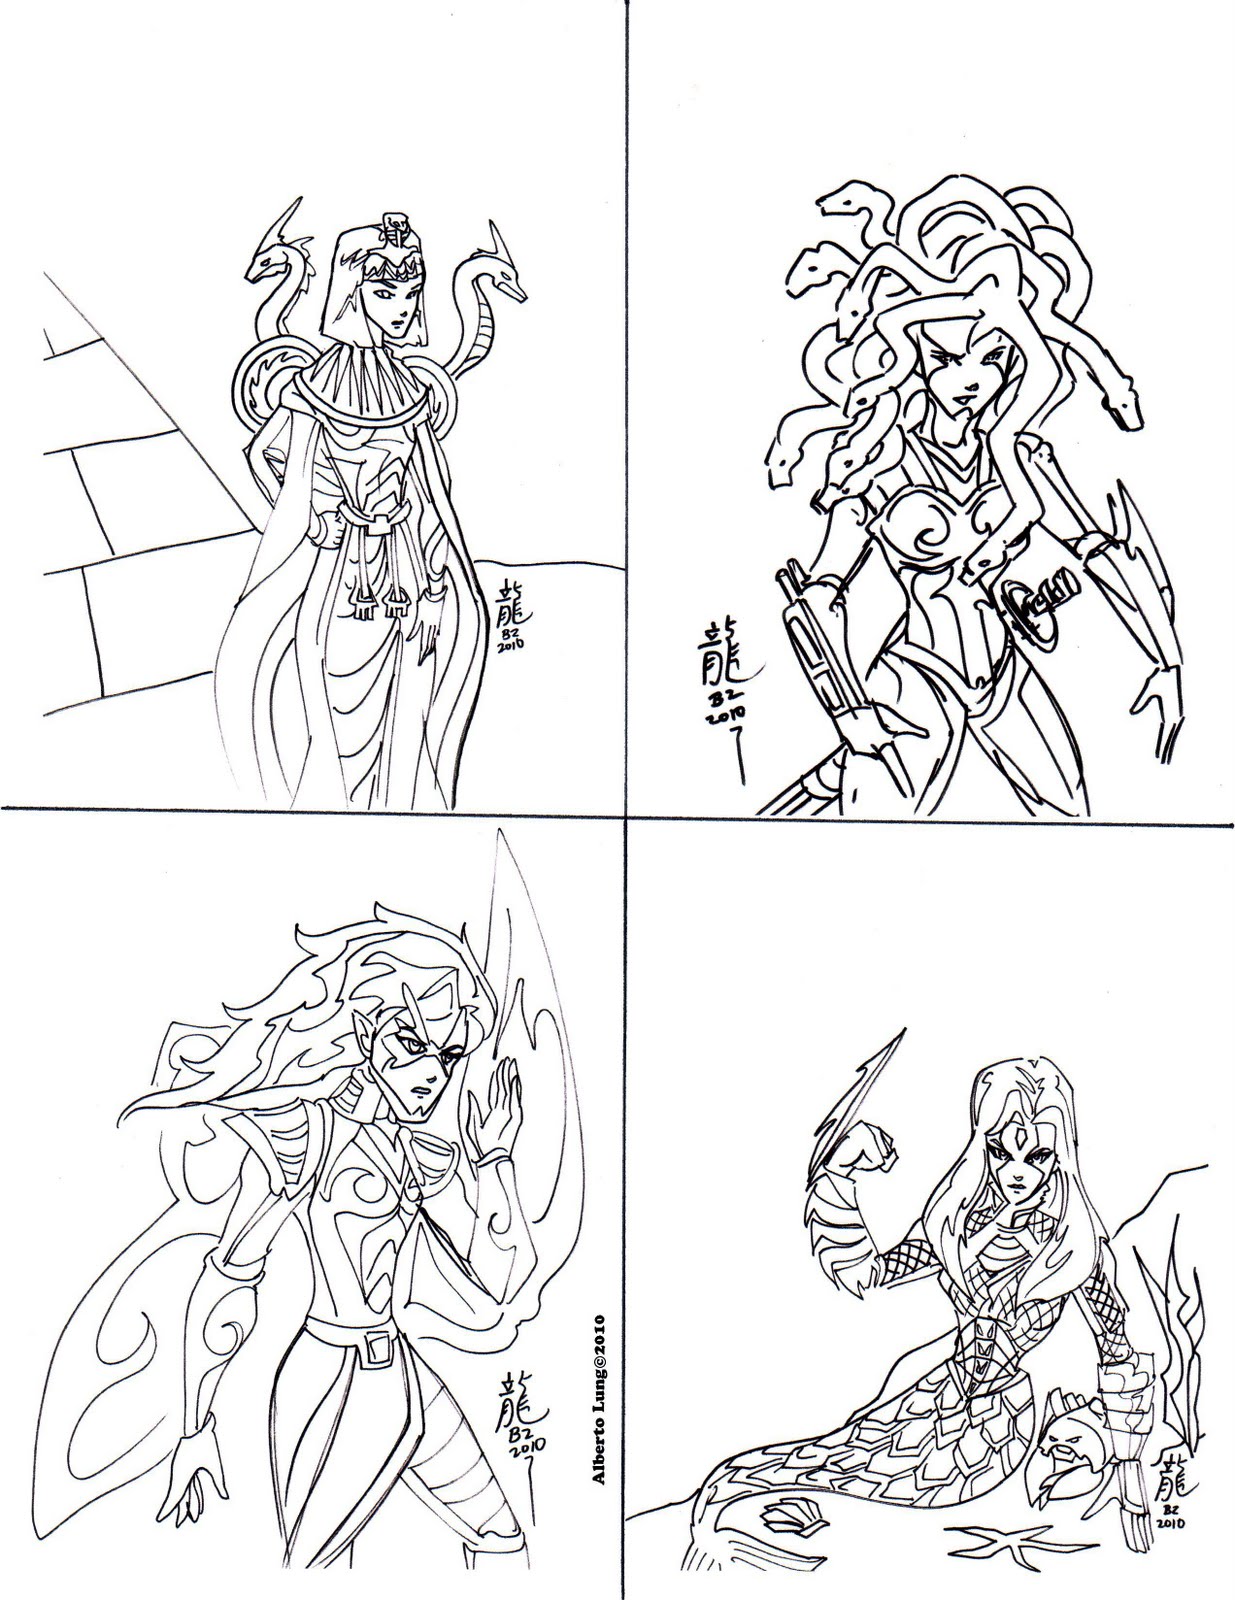 GREEK MYTHOLOGY COLORING SHEETS Â« Free Coloring Pages